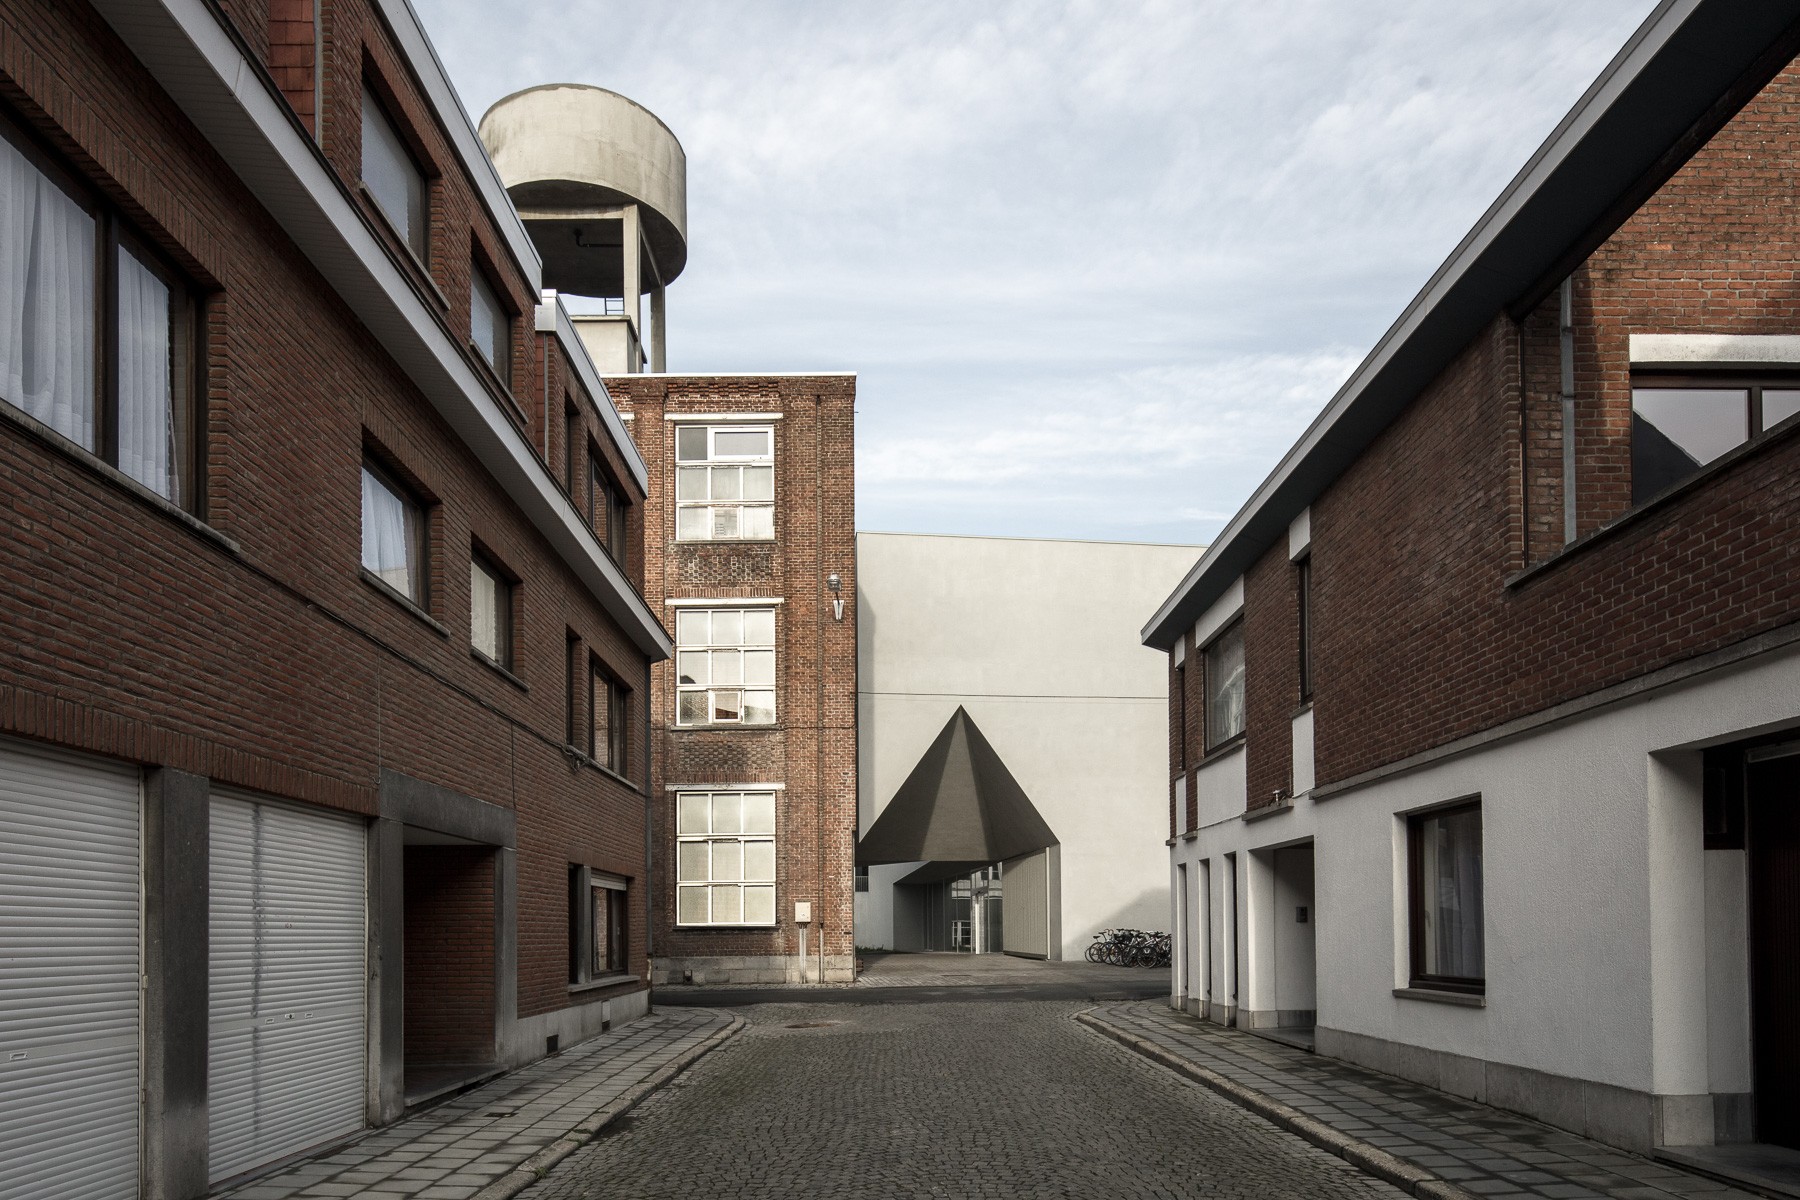 Architecture Faculty in Tournai _ Aires Mateus